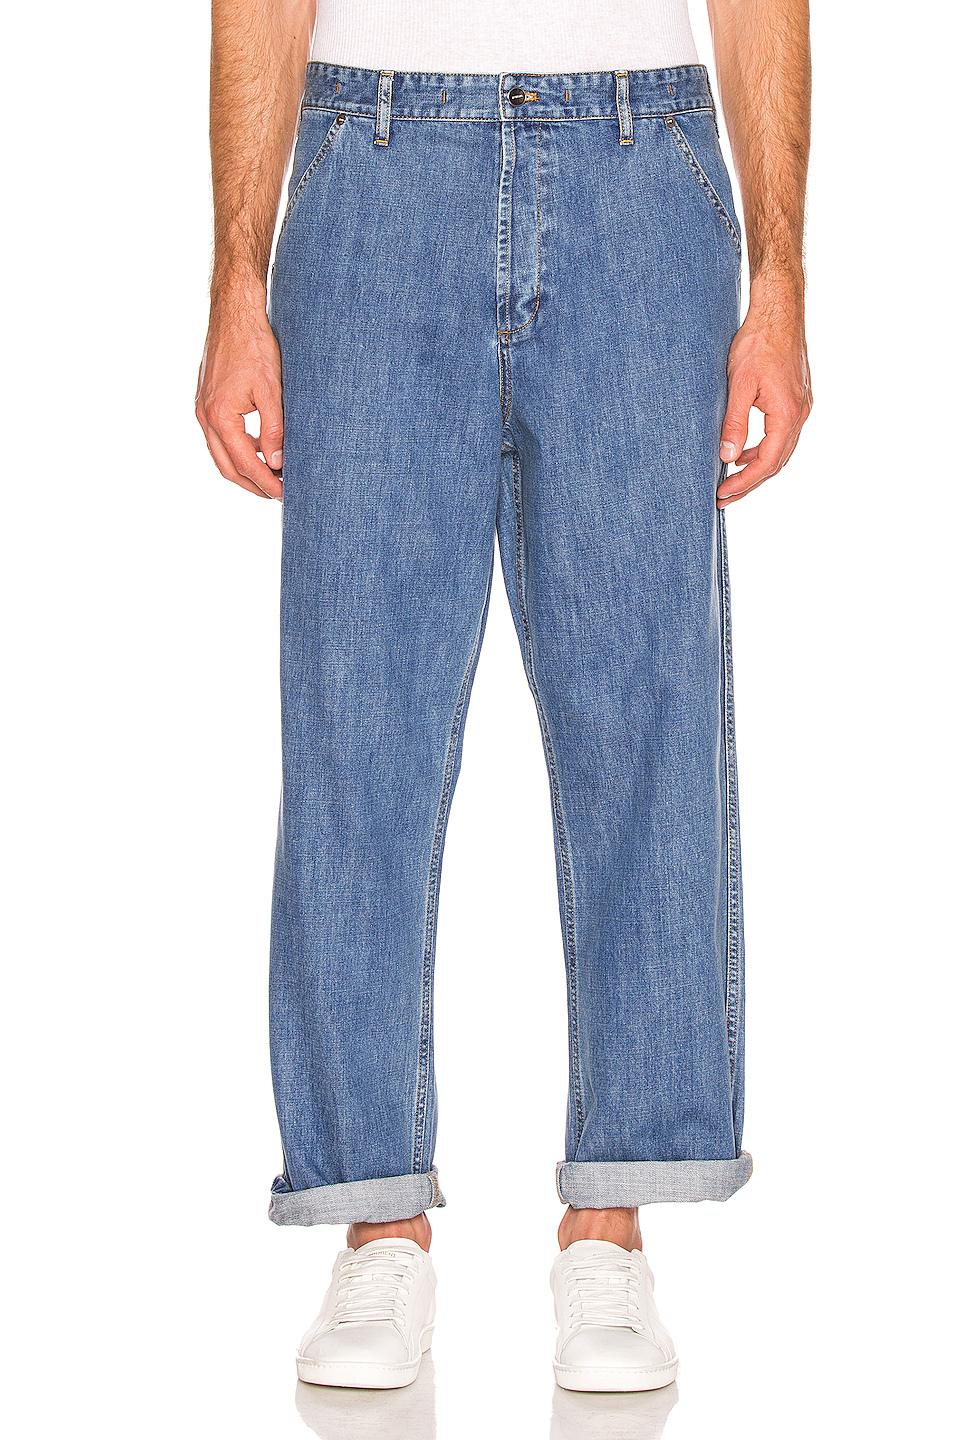 Jacquemus Denim Jeans in Stone Washed Blue (Blue) for Men - Lyst